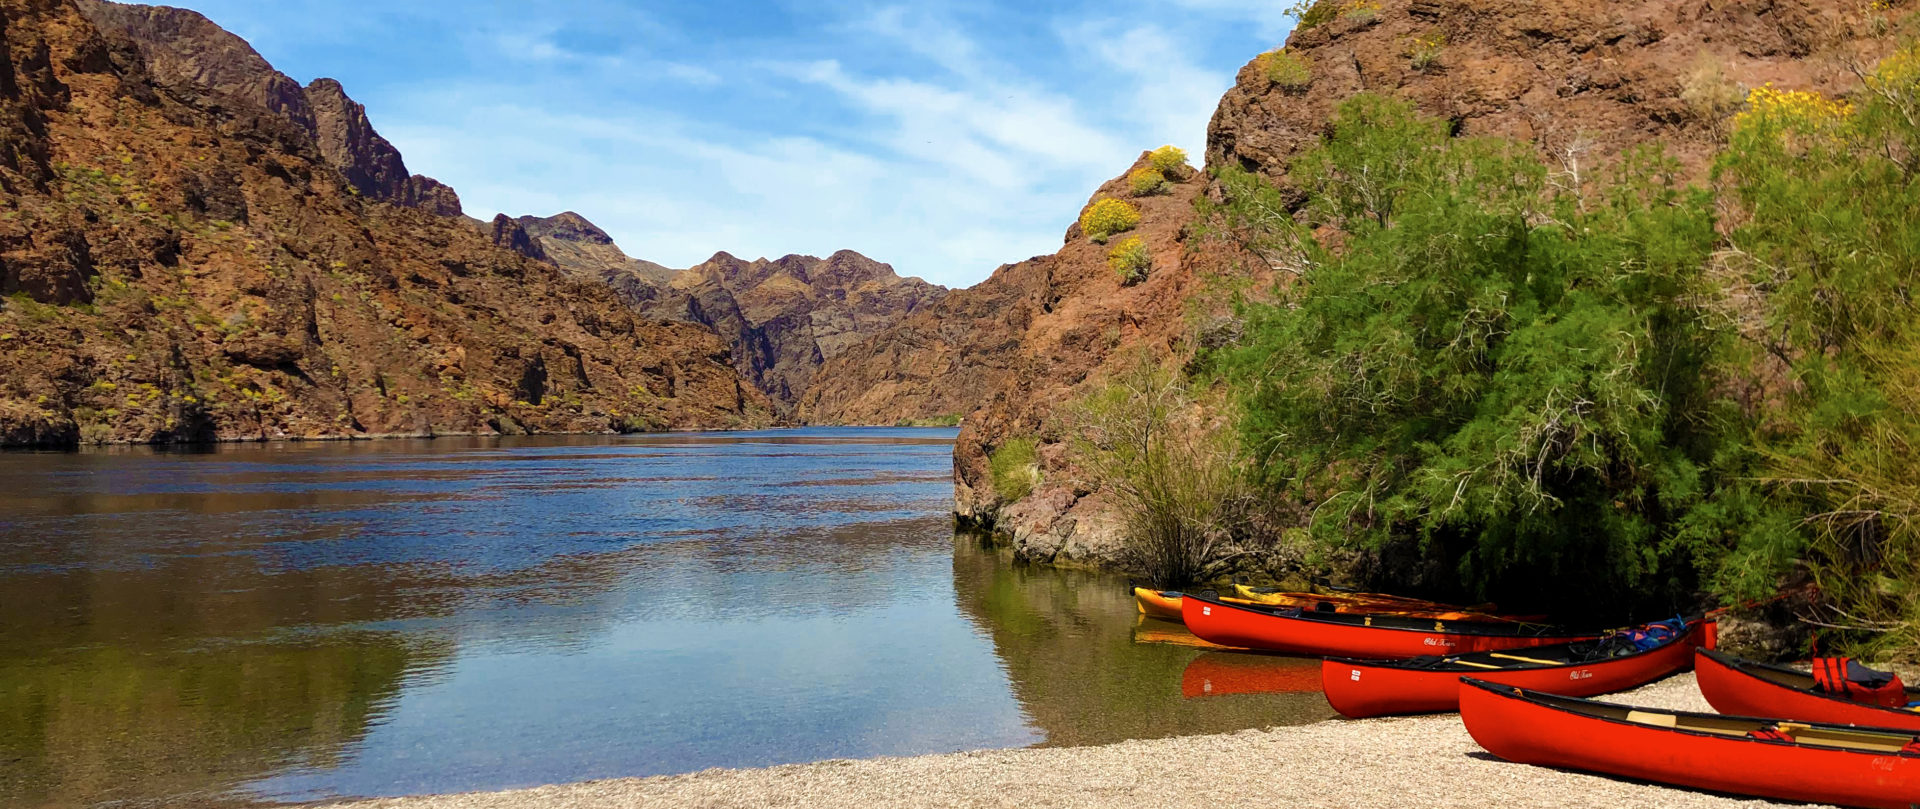 A view of a Las Vegas lake where bright red Kayaks are seen in front while rocky mountains are seen in the background